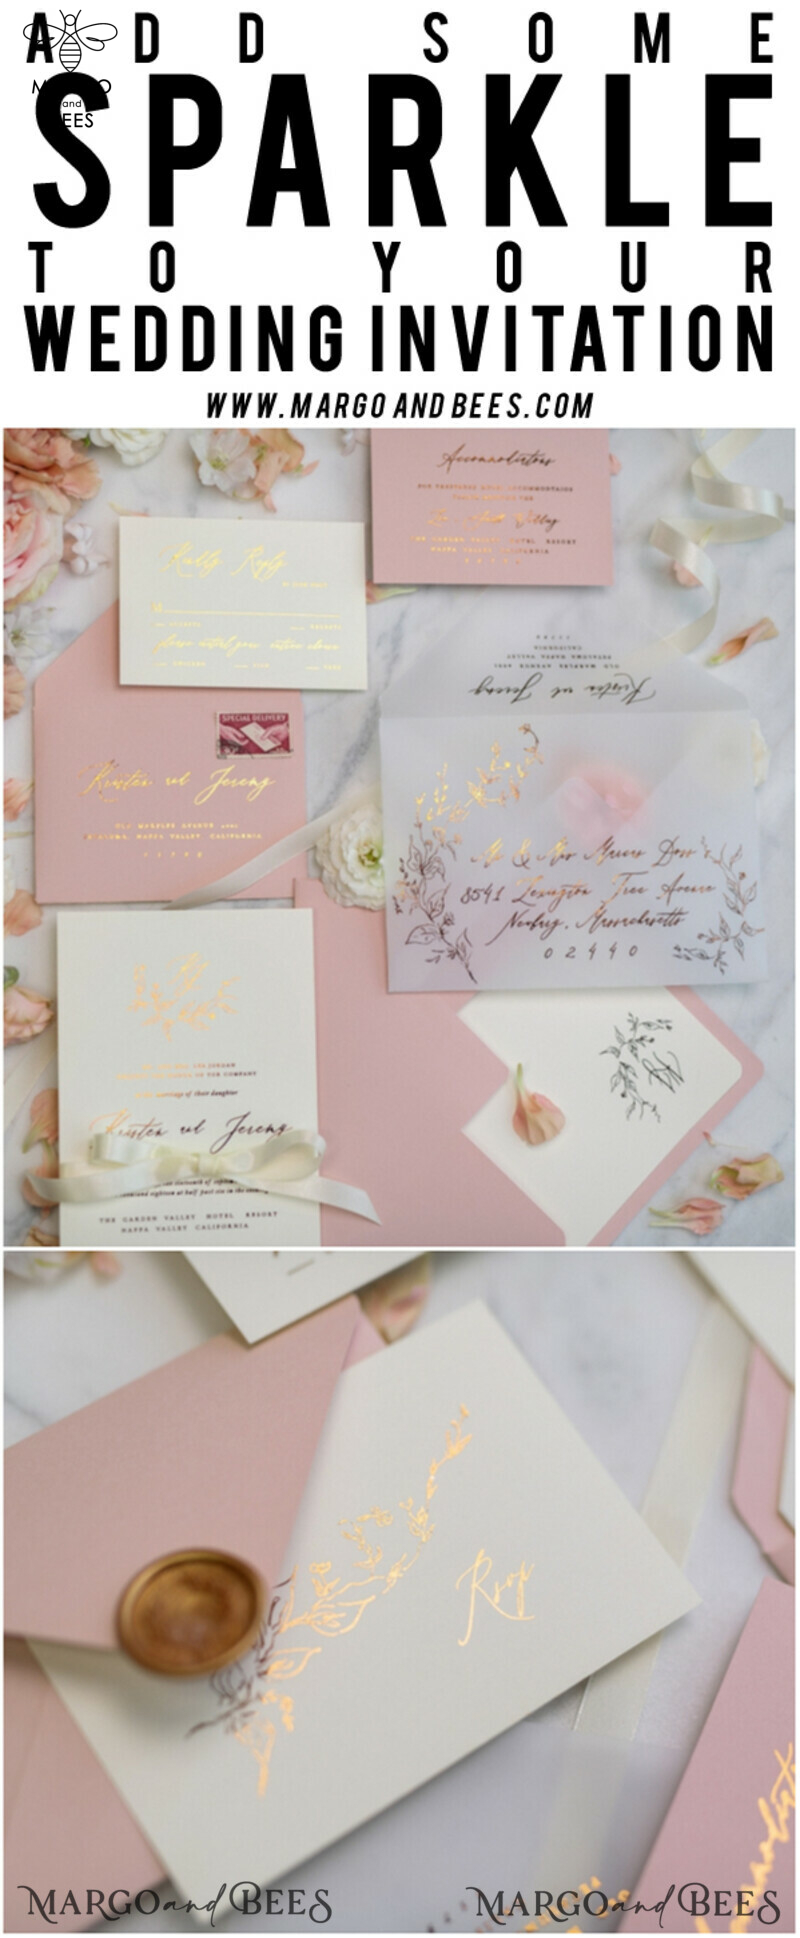 Bespoke Vellum Wedding Invitation Suite: Romantic Blush Pink and Glamour Gold Foil with Elegant Golden Touch-35